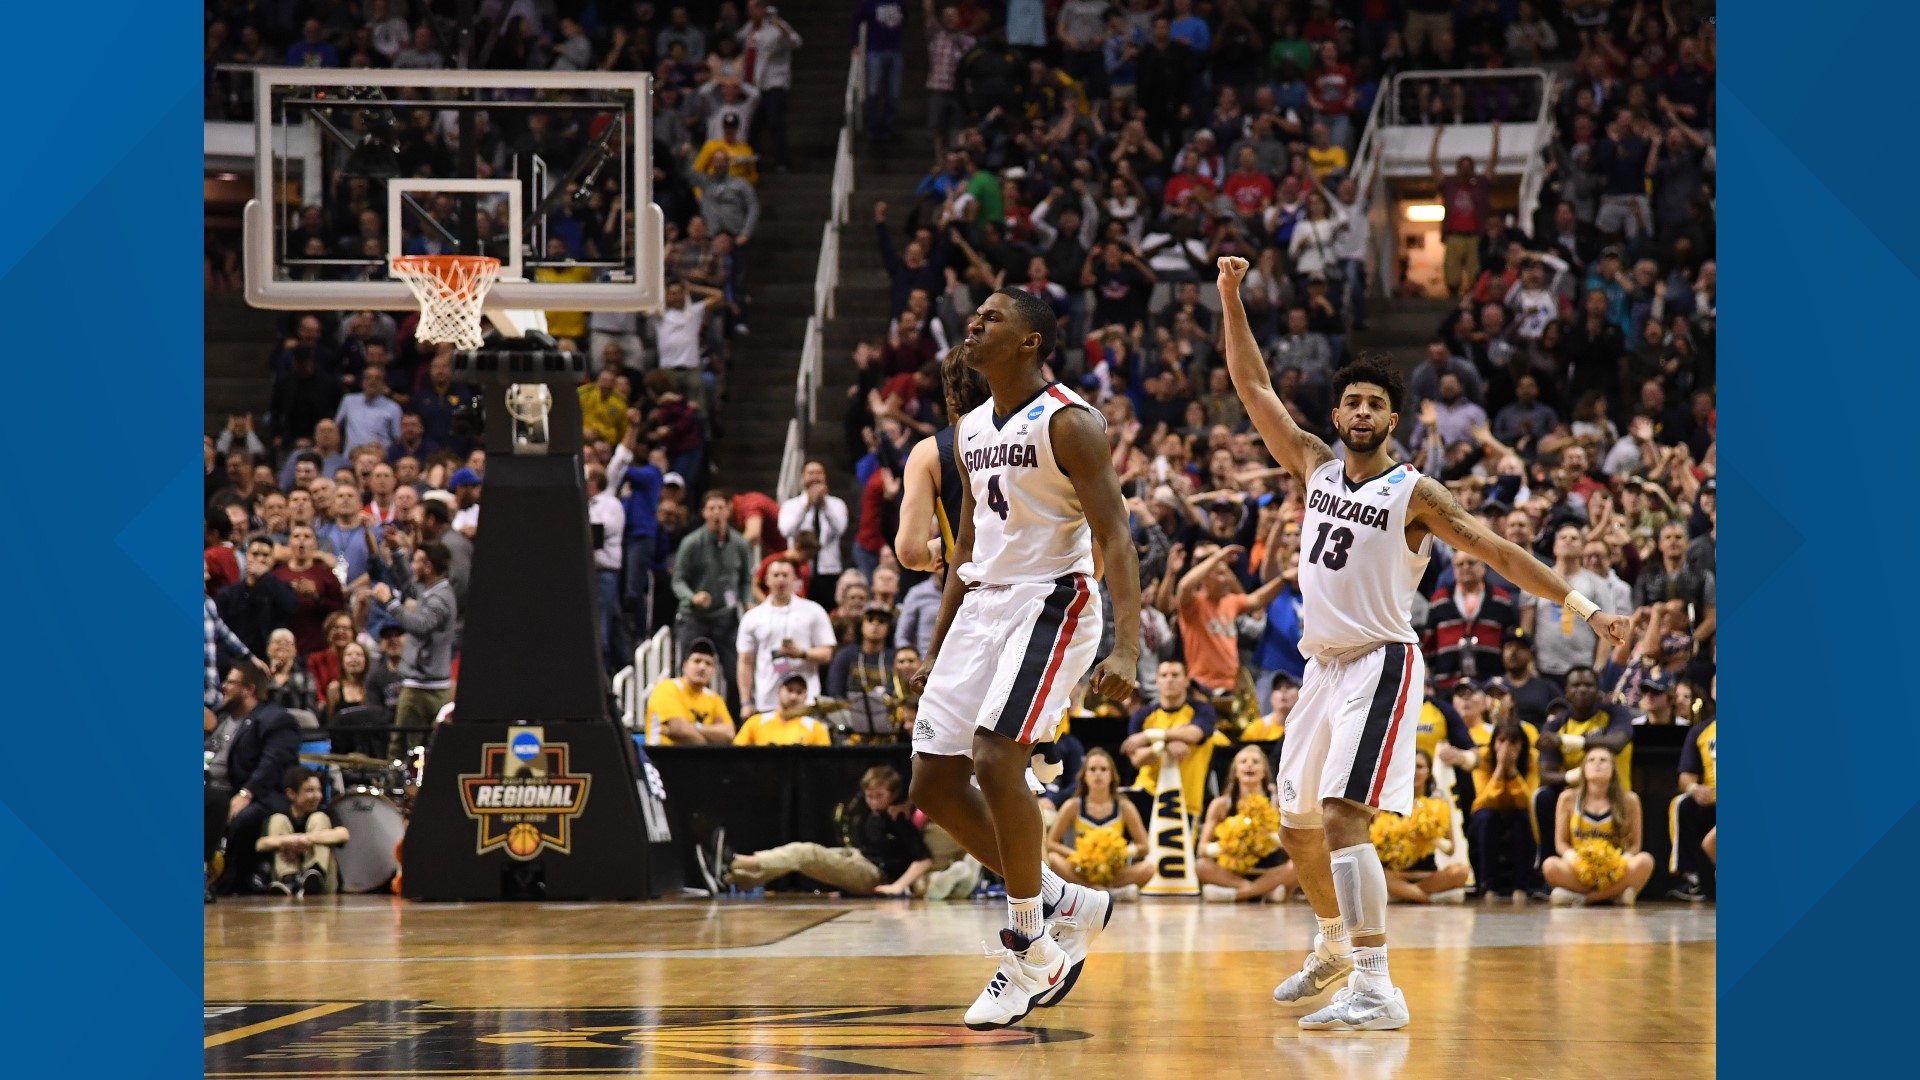 Mathews' shot remains one of the most important shots in Gonzaga history